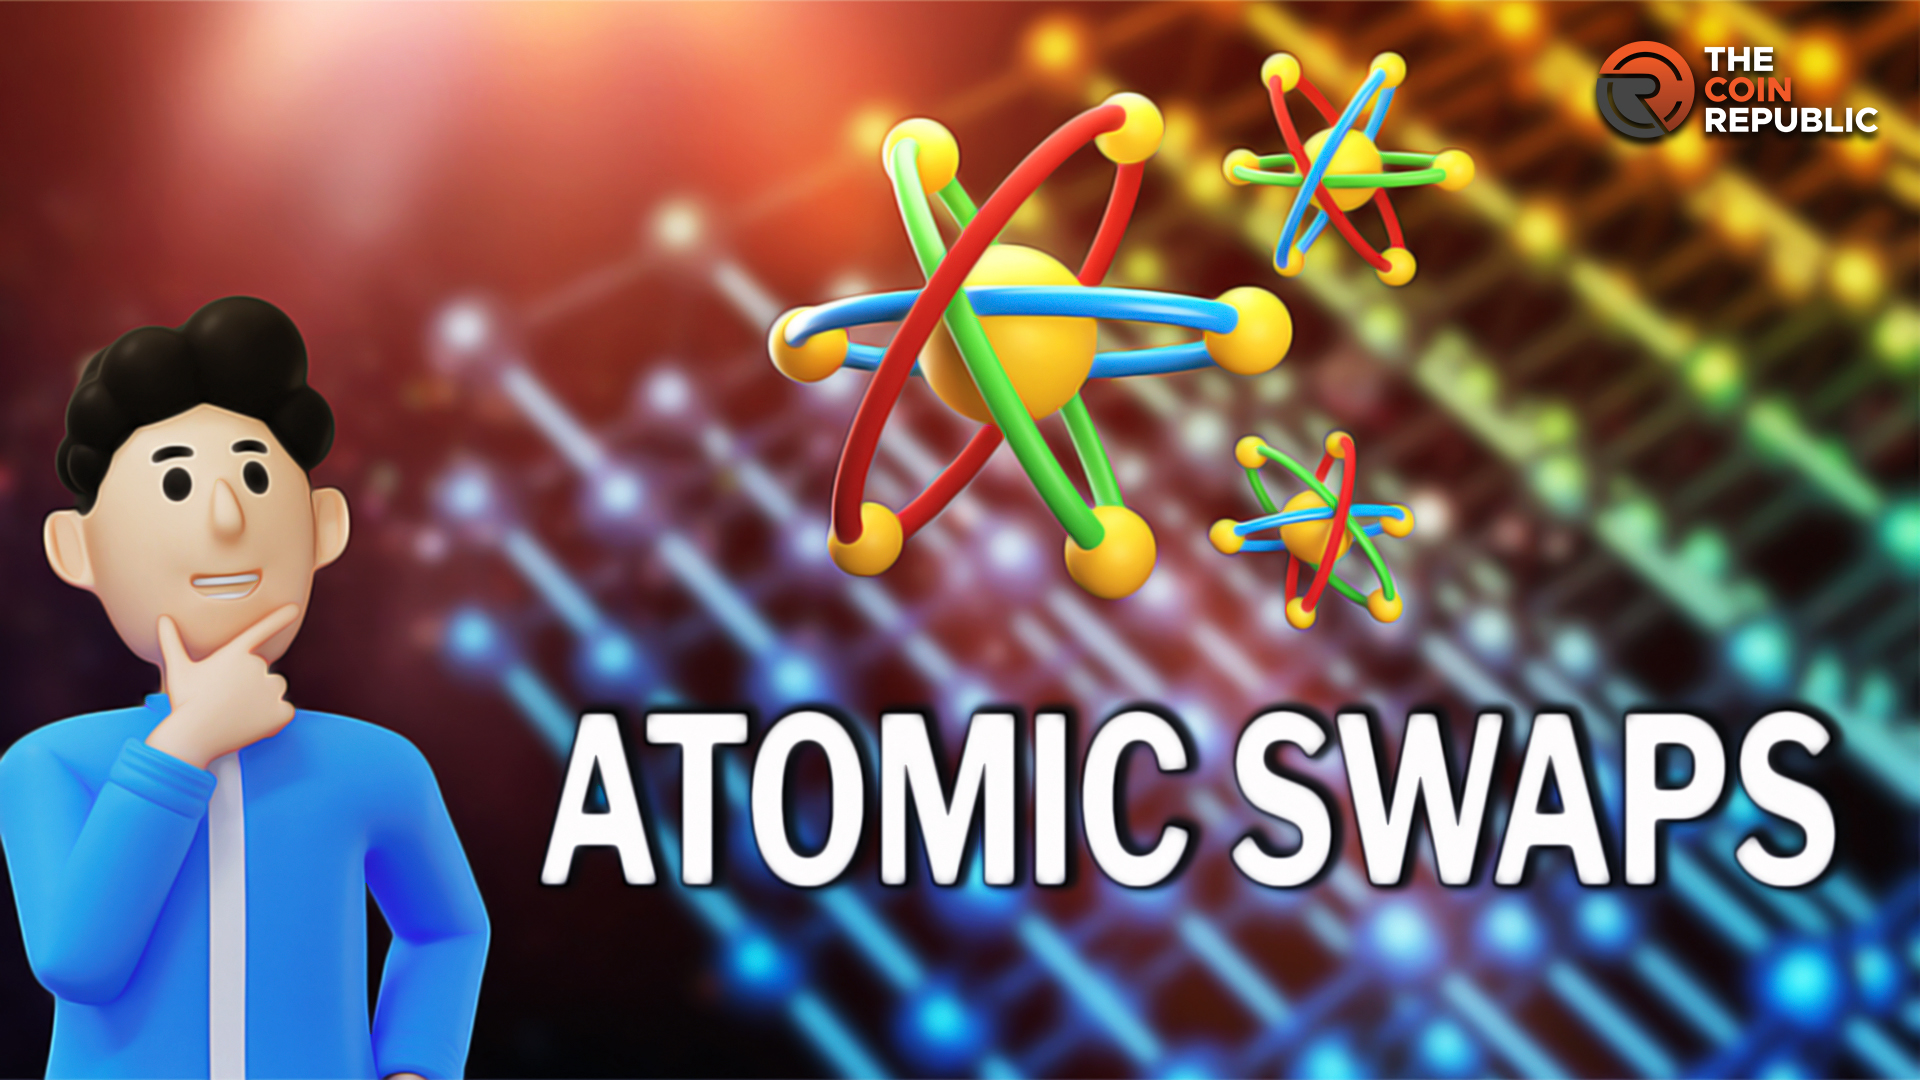 What Are Atomic Swaps And How Do They Work?